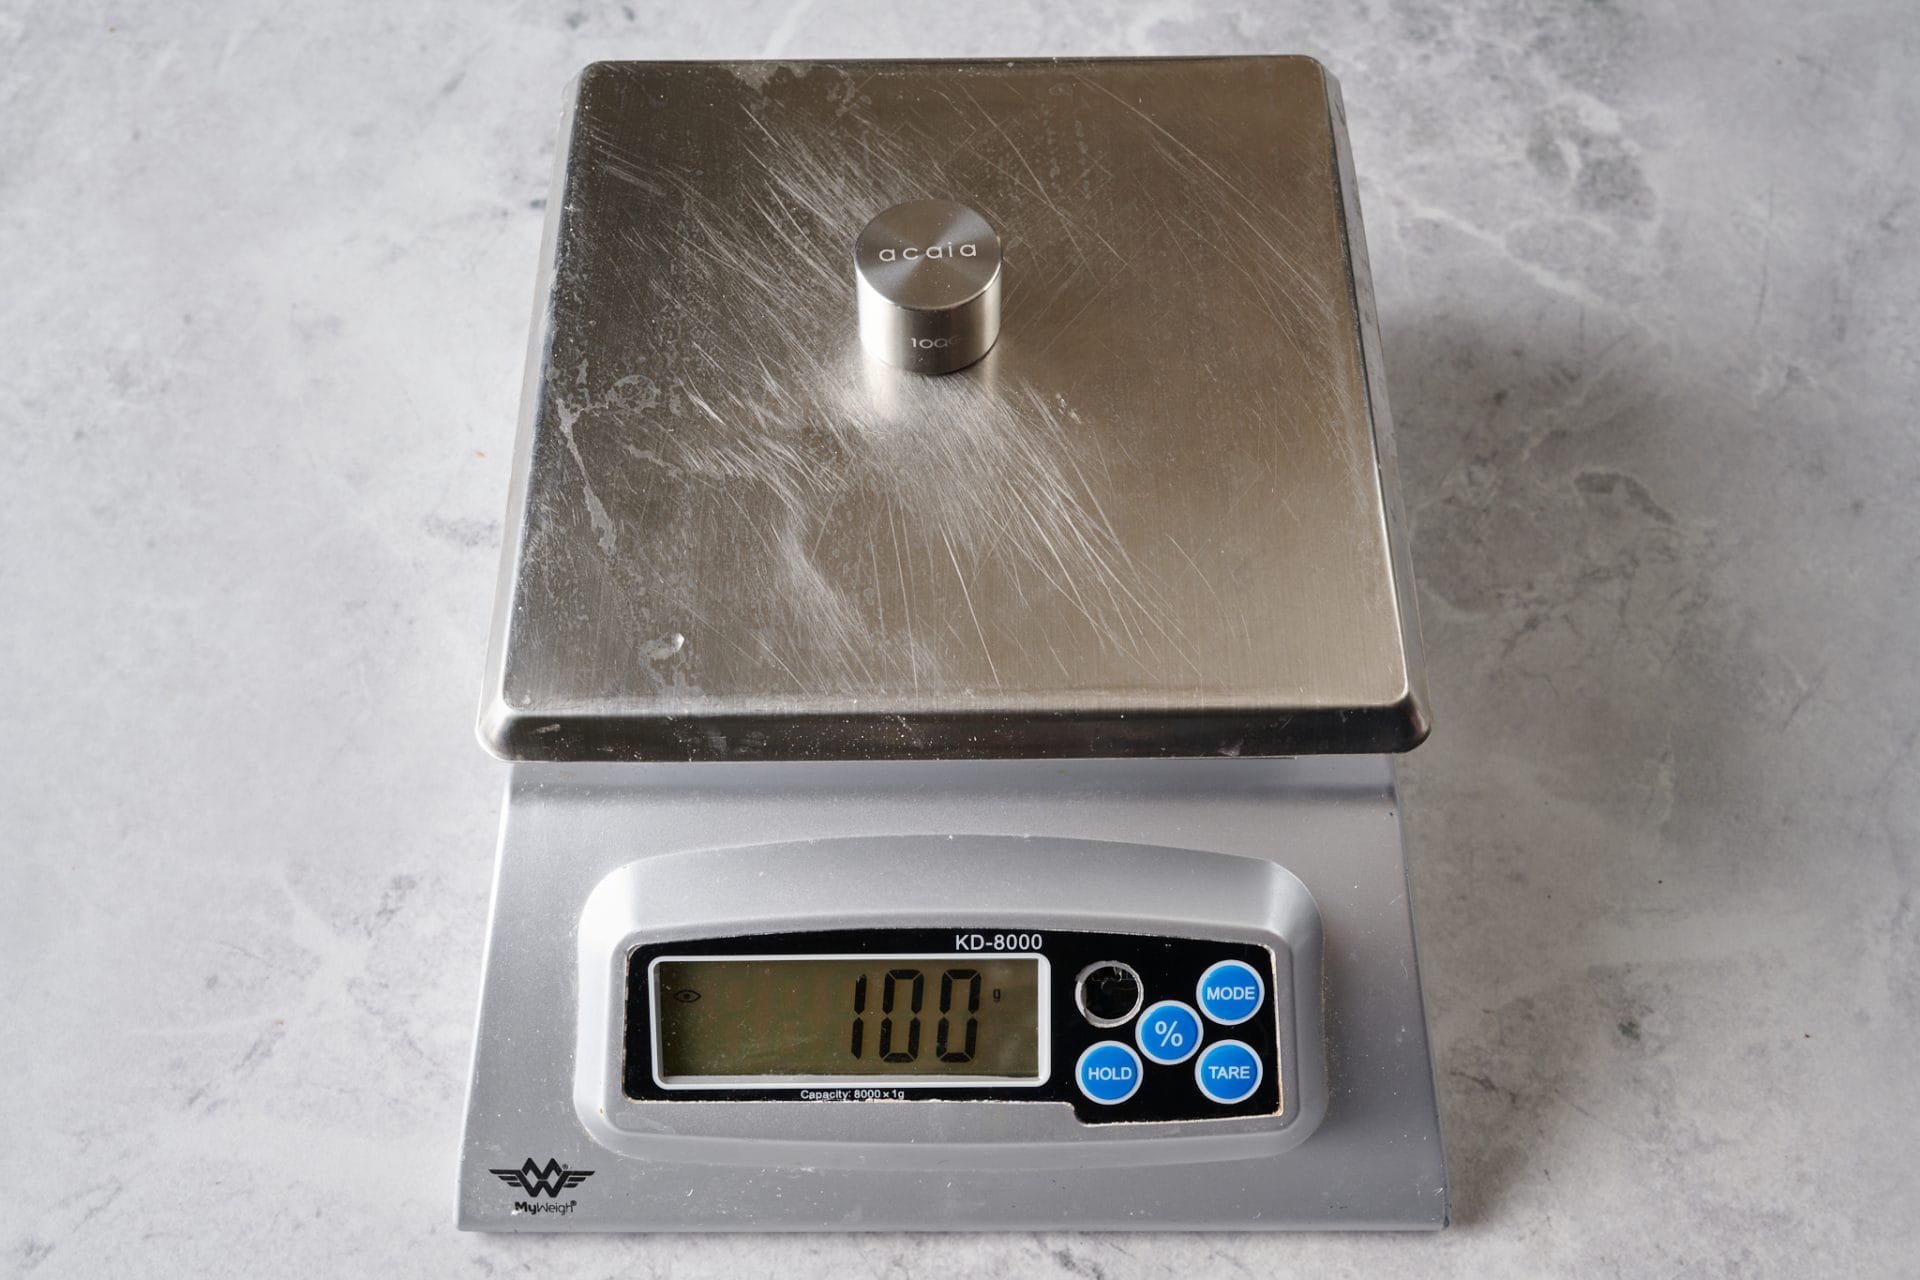 Testing the weighing accuracy of the MyWeigh scale.